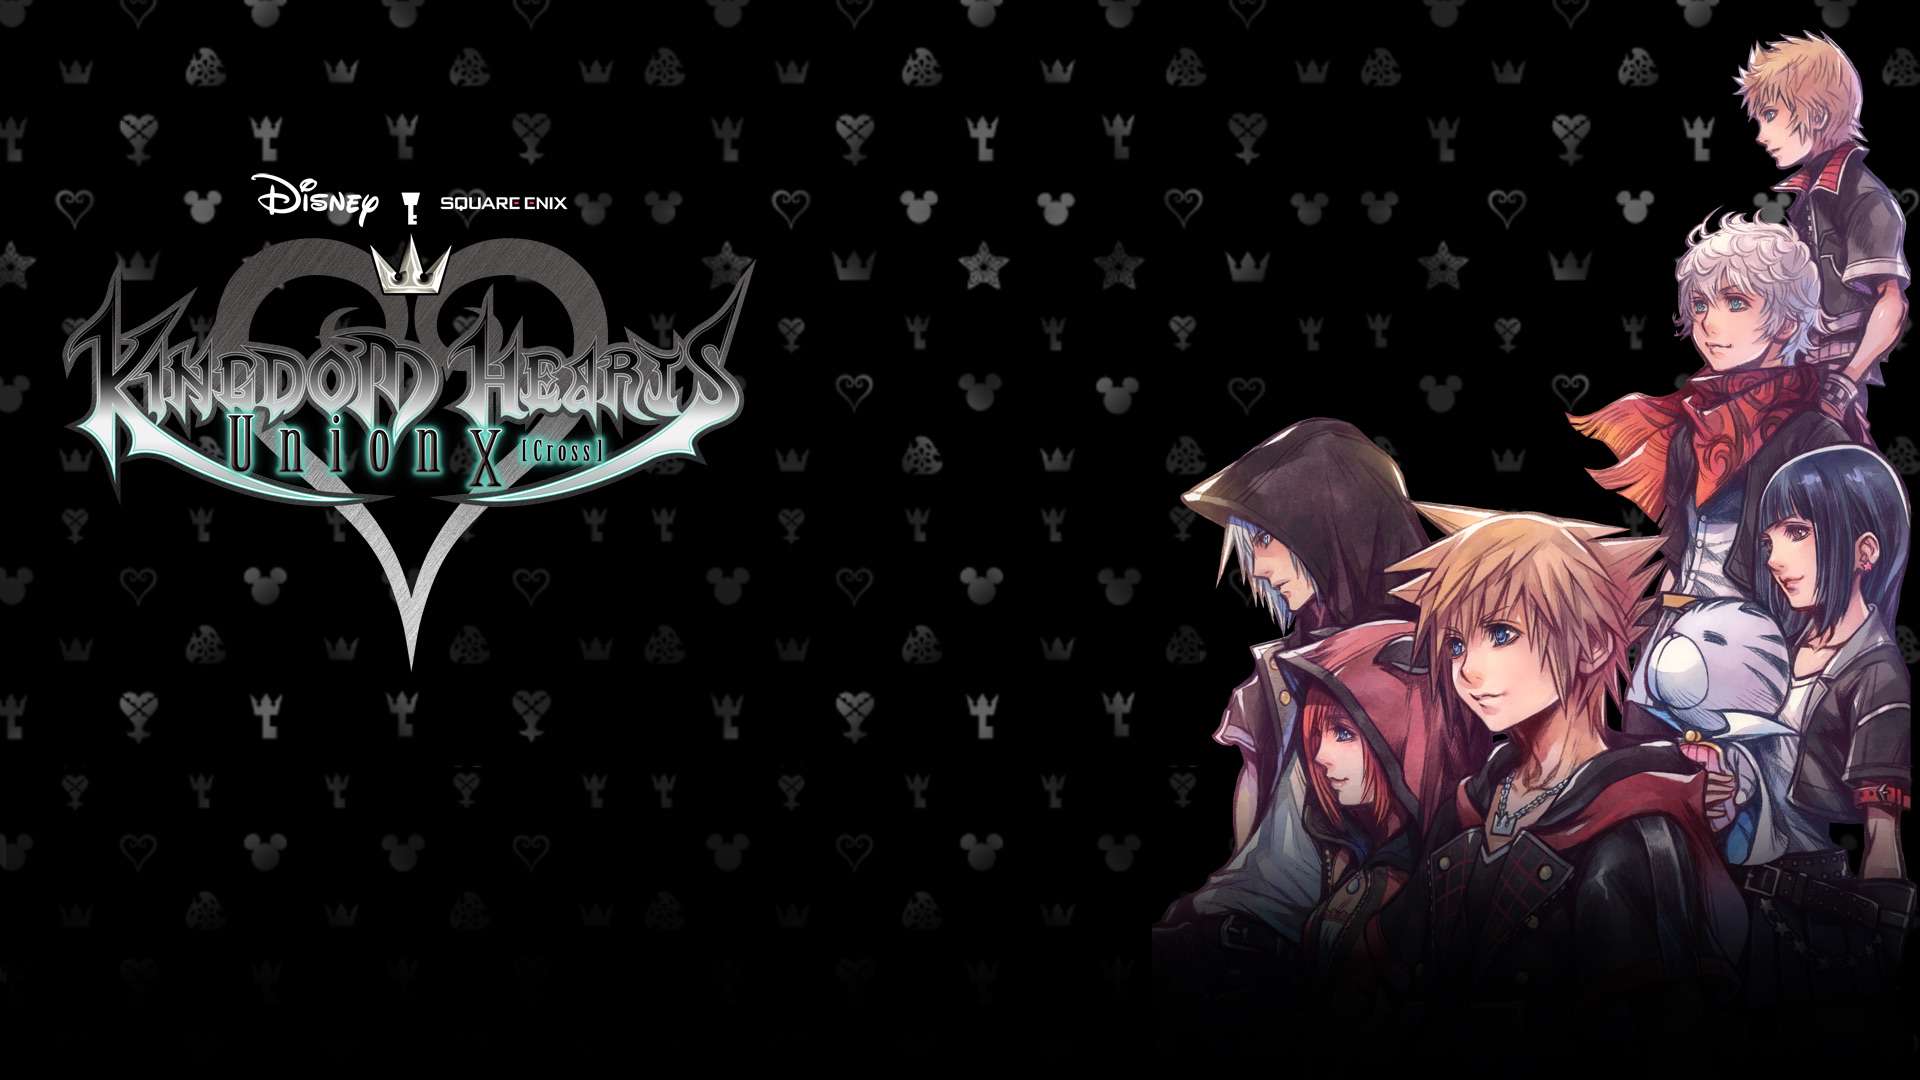 KINGDOM HEARTS Union χ[Cross] Now Available on Amazon Devices